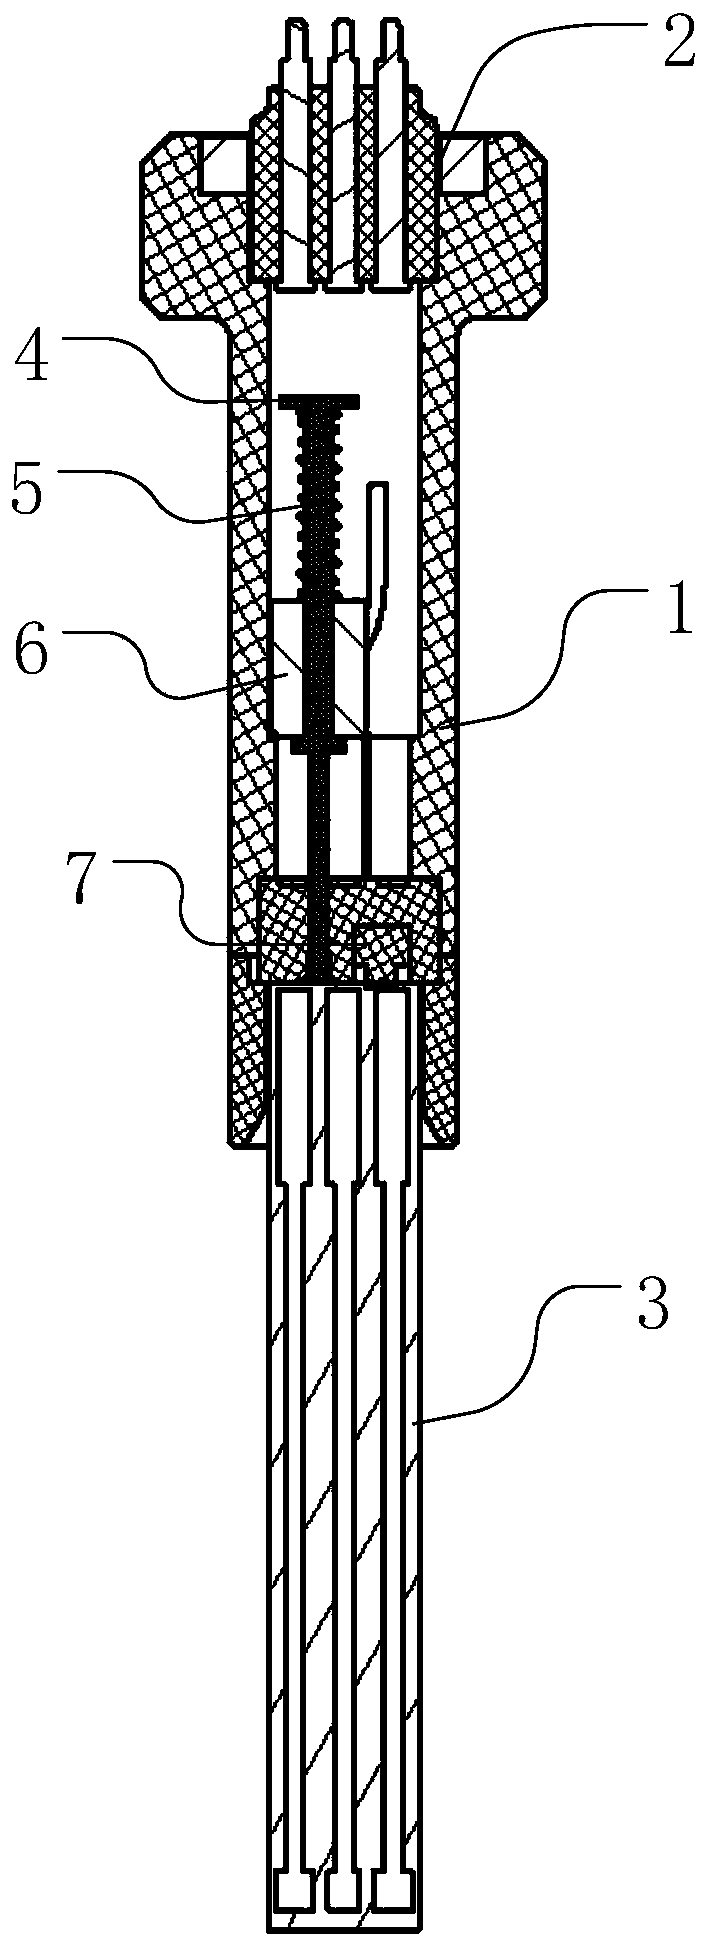 Electric pop-up electrode rod and vitamin detector employing electrode rod